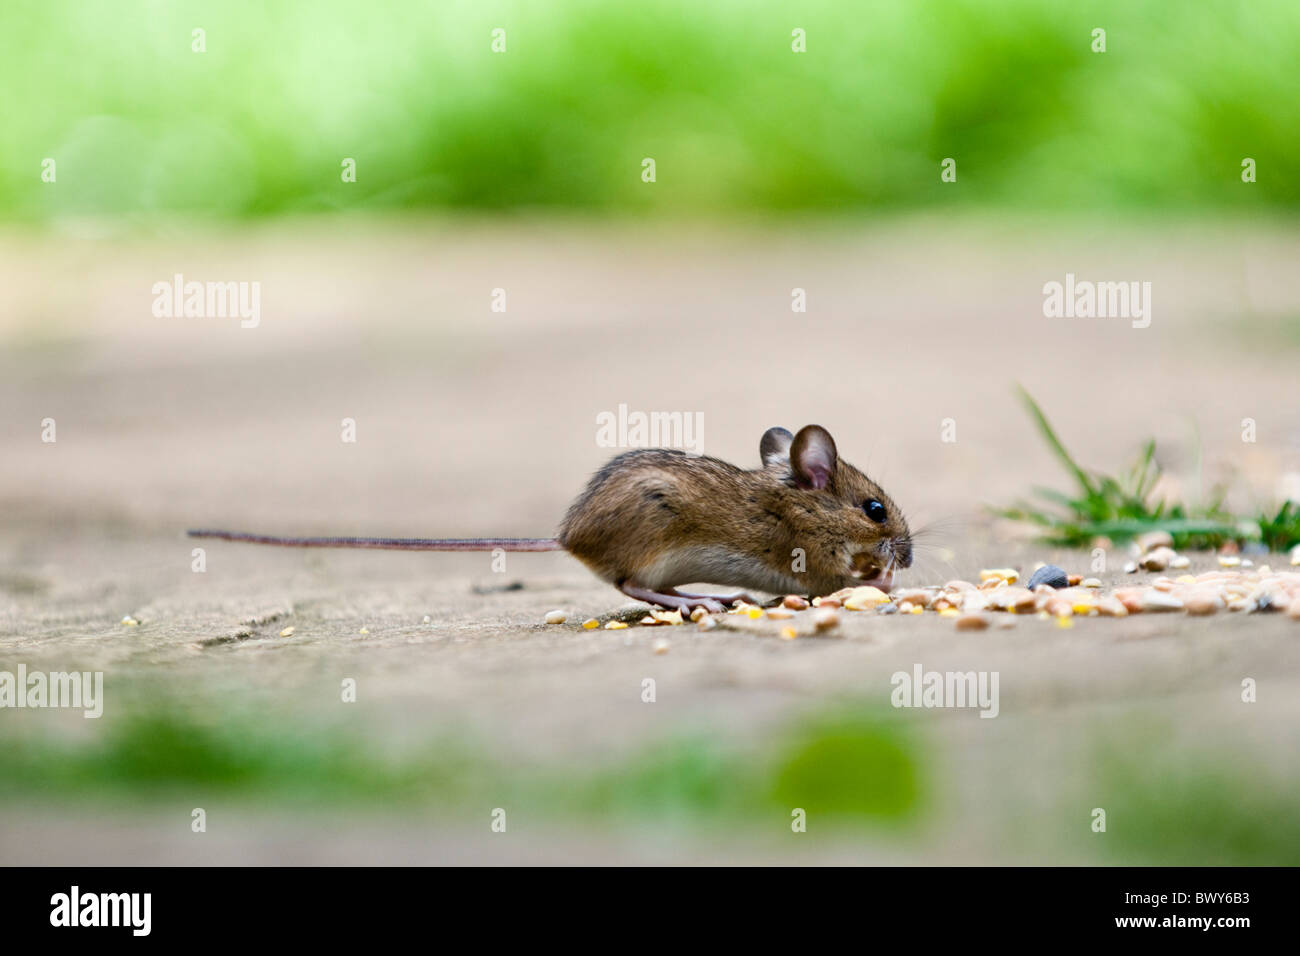 Wood mouse, also known as field or long-tailed mouse running out to eat bird seed on patio in garden Stock Photo